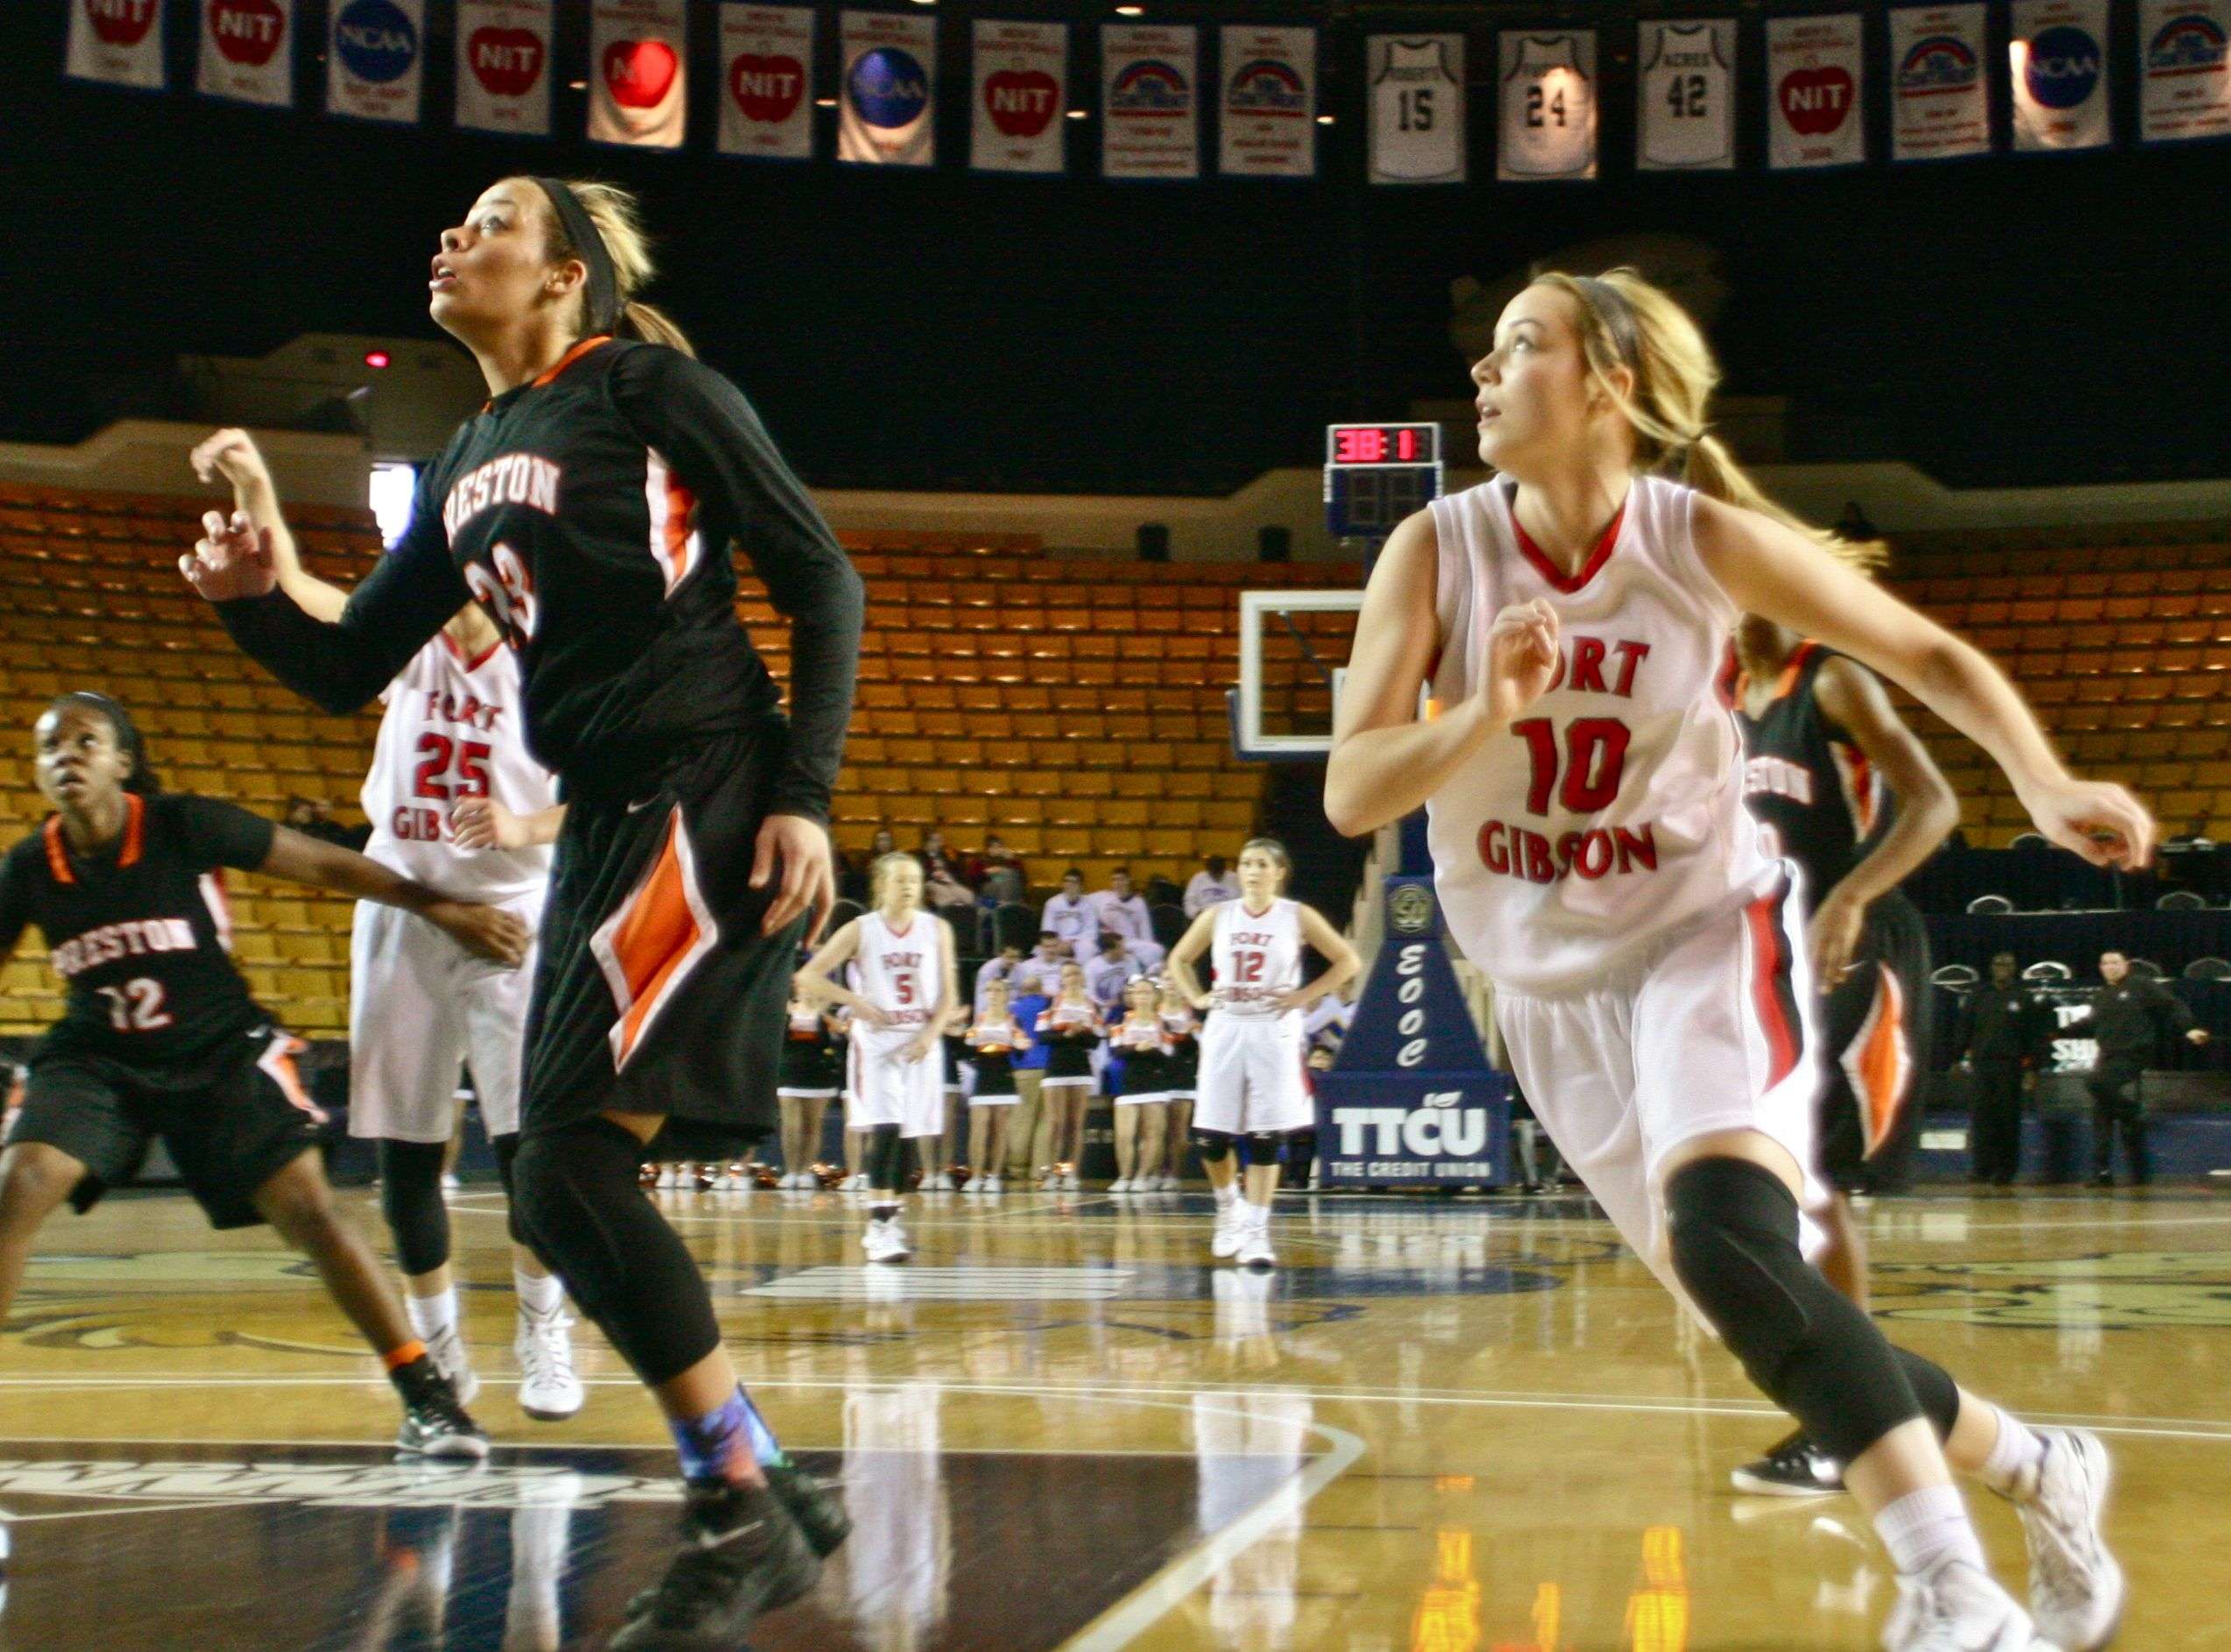 Christie hustles for rebound positioning against Preston's 5-11 junior Chelsea Dungee (23), who ESPN ranks as the nation's 27th best college prospect in the 2016 class. Fort Gibson beat Preston in overtime, 68-66, to win the 5th place trophy in the TOC and finish the three-day event with a 2-1 record.